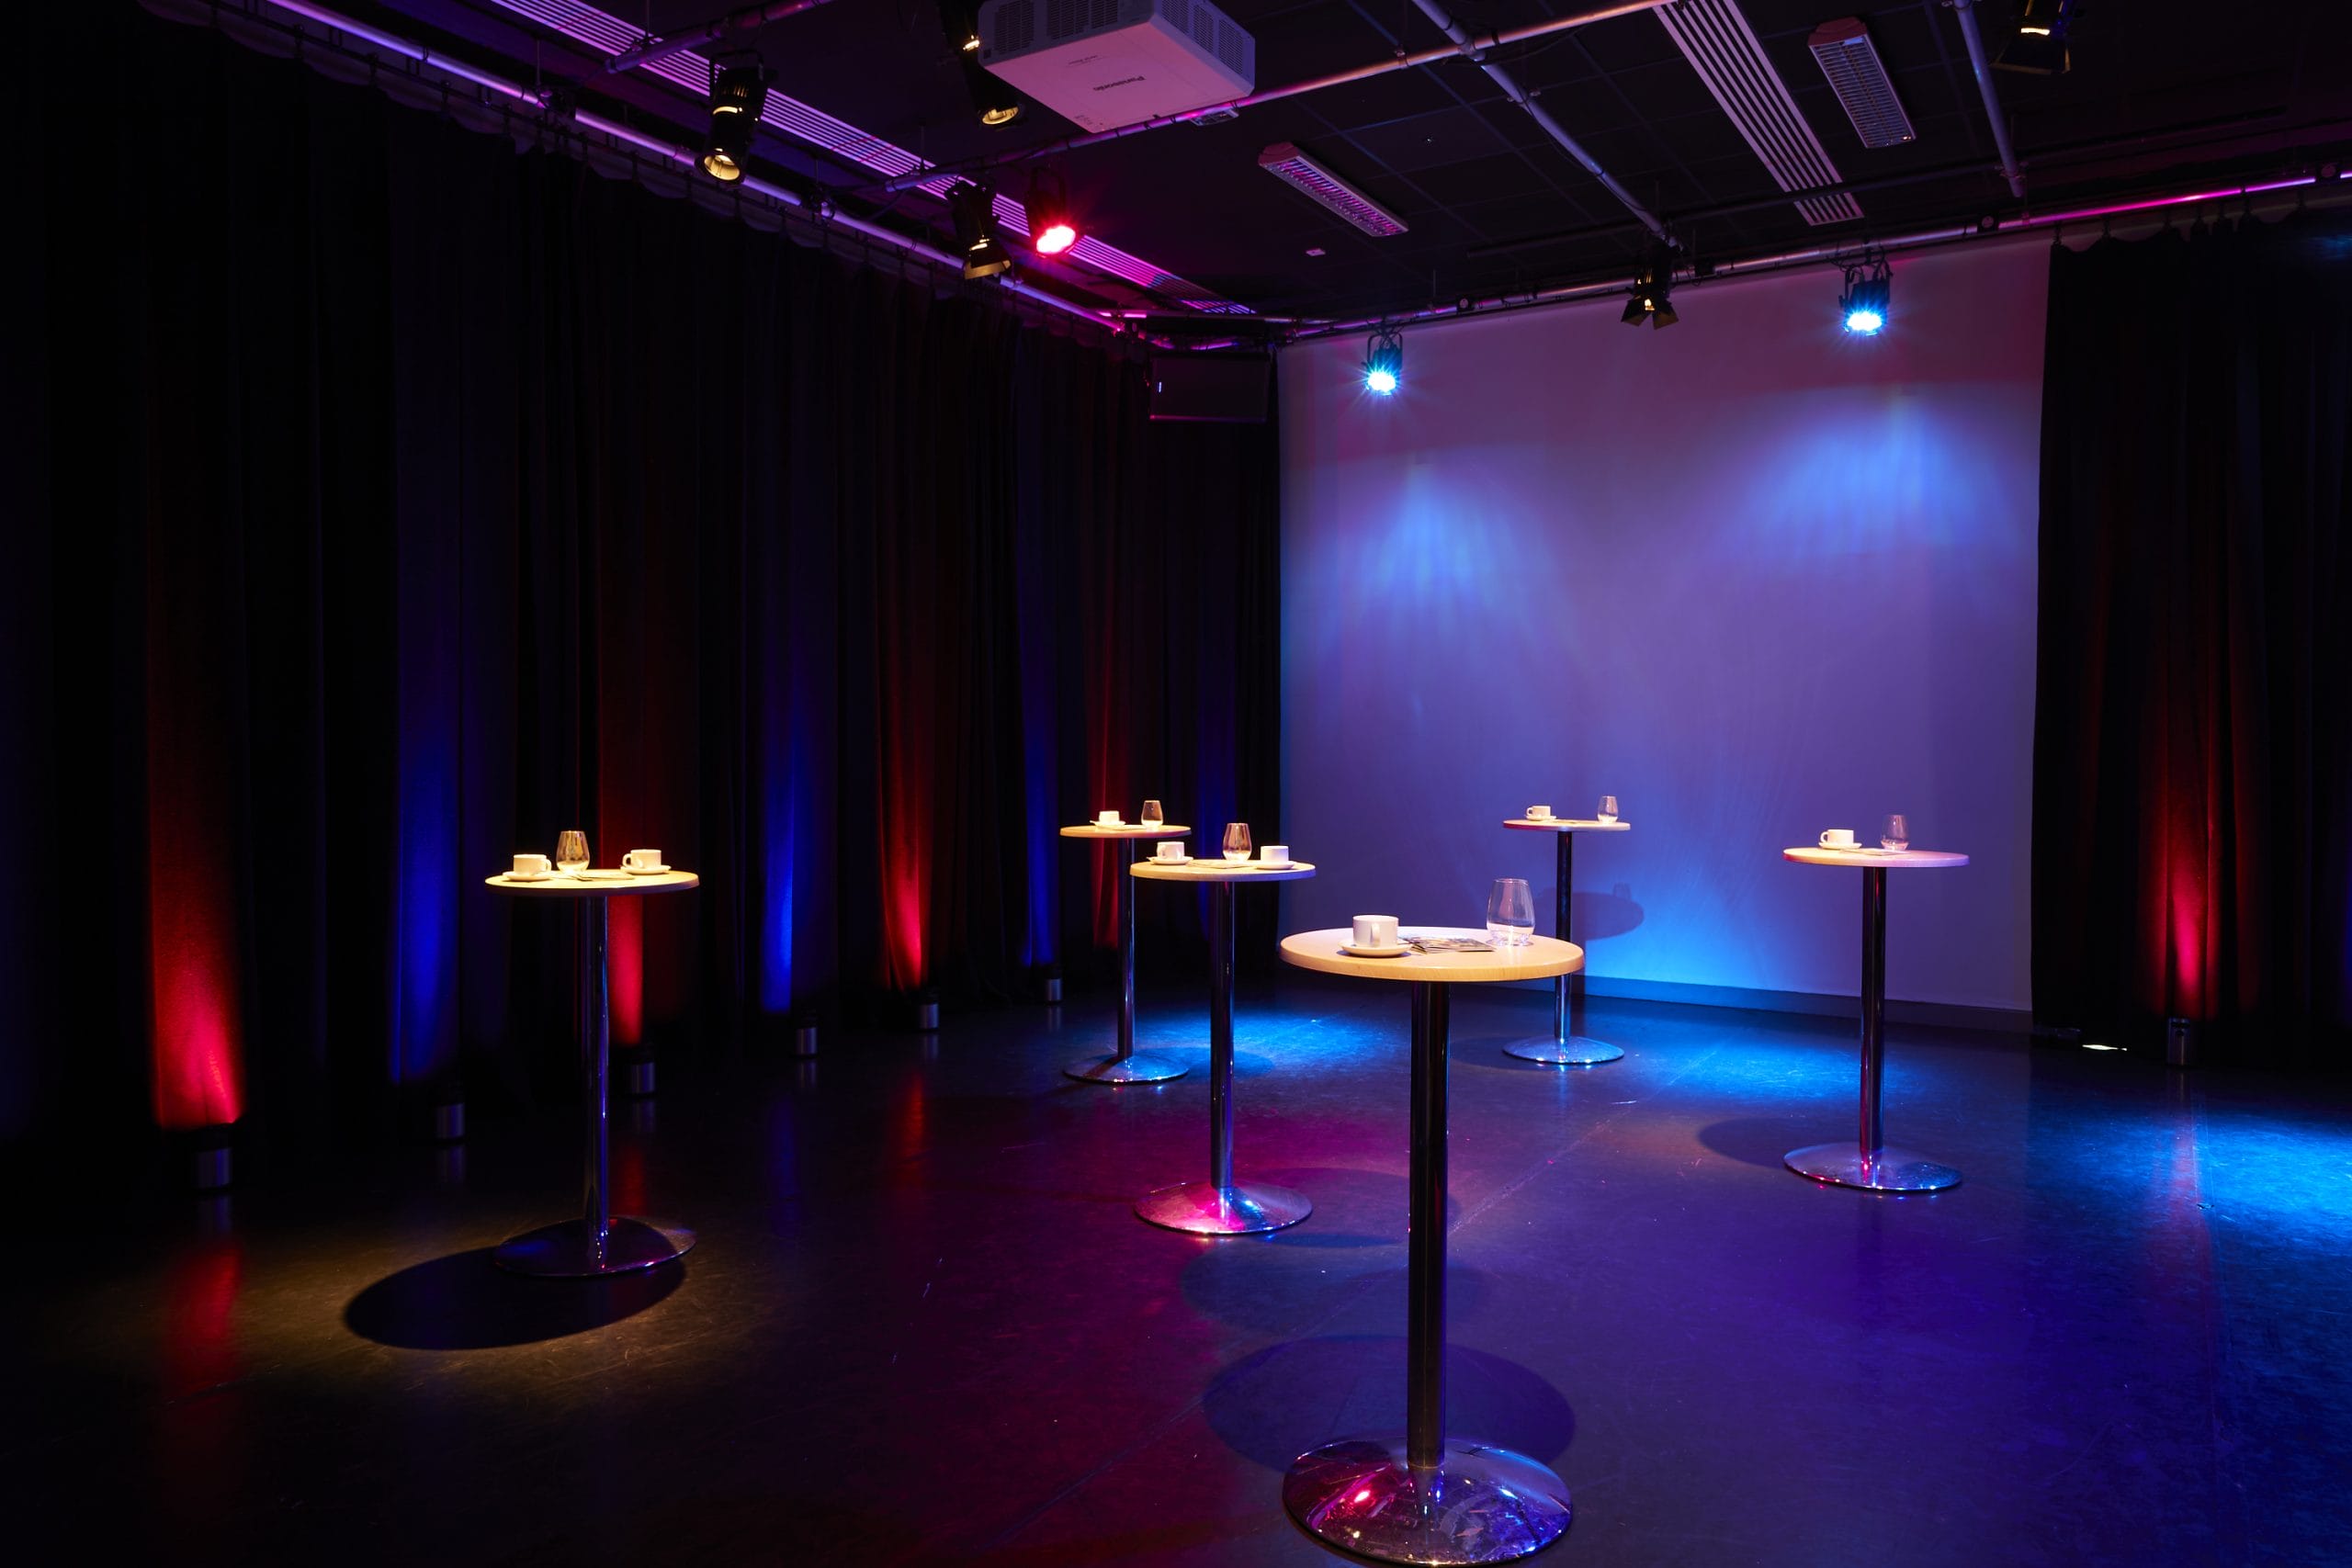 A room lit with red and blue lights set up with high tables with coffee cups on them